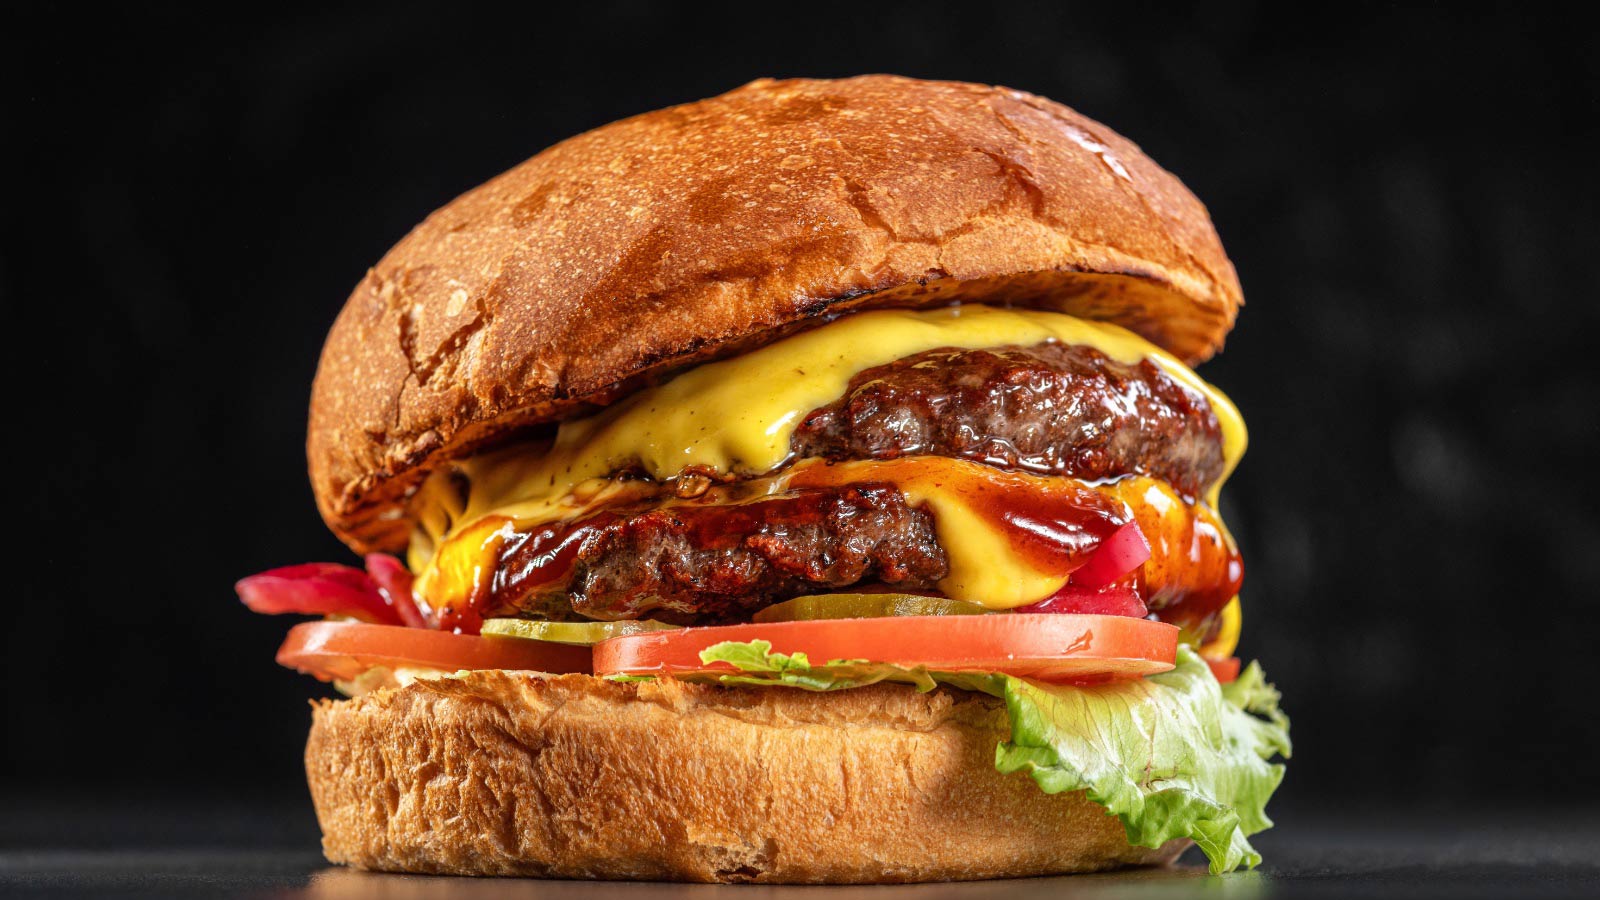 18 Burgers That Will Rock Your World